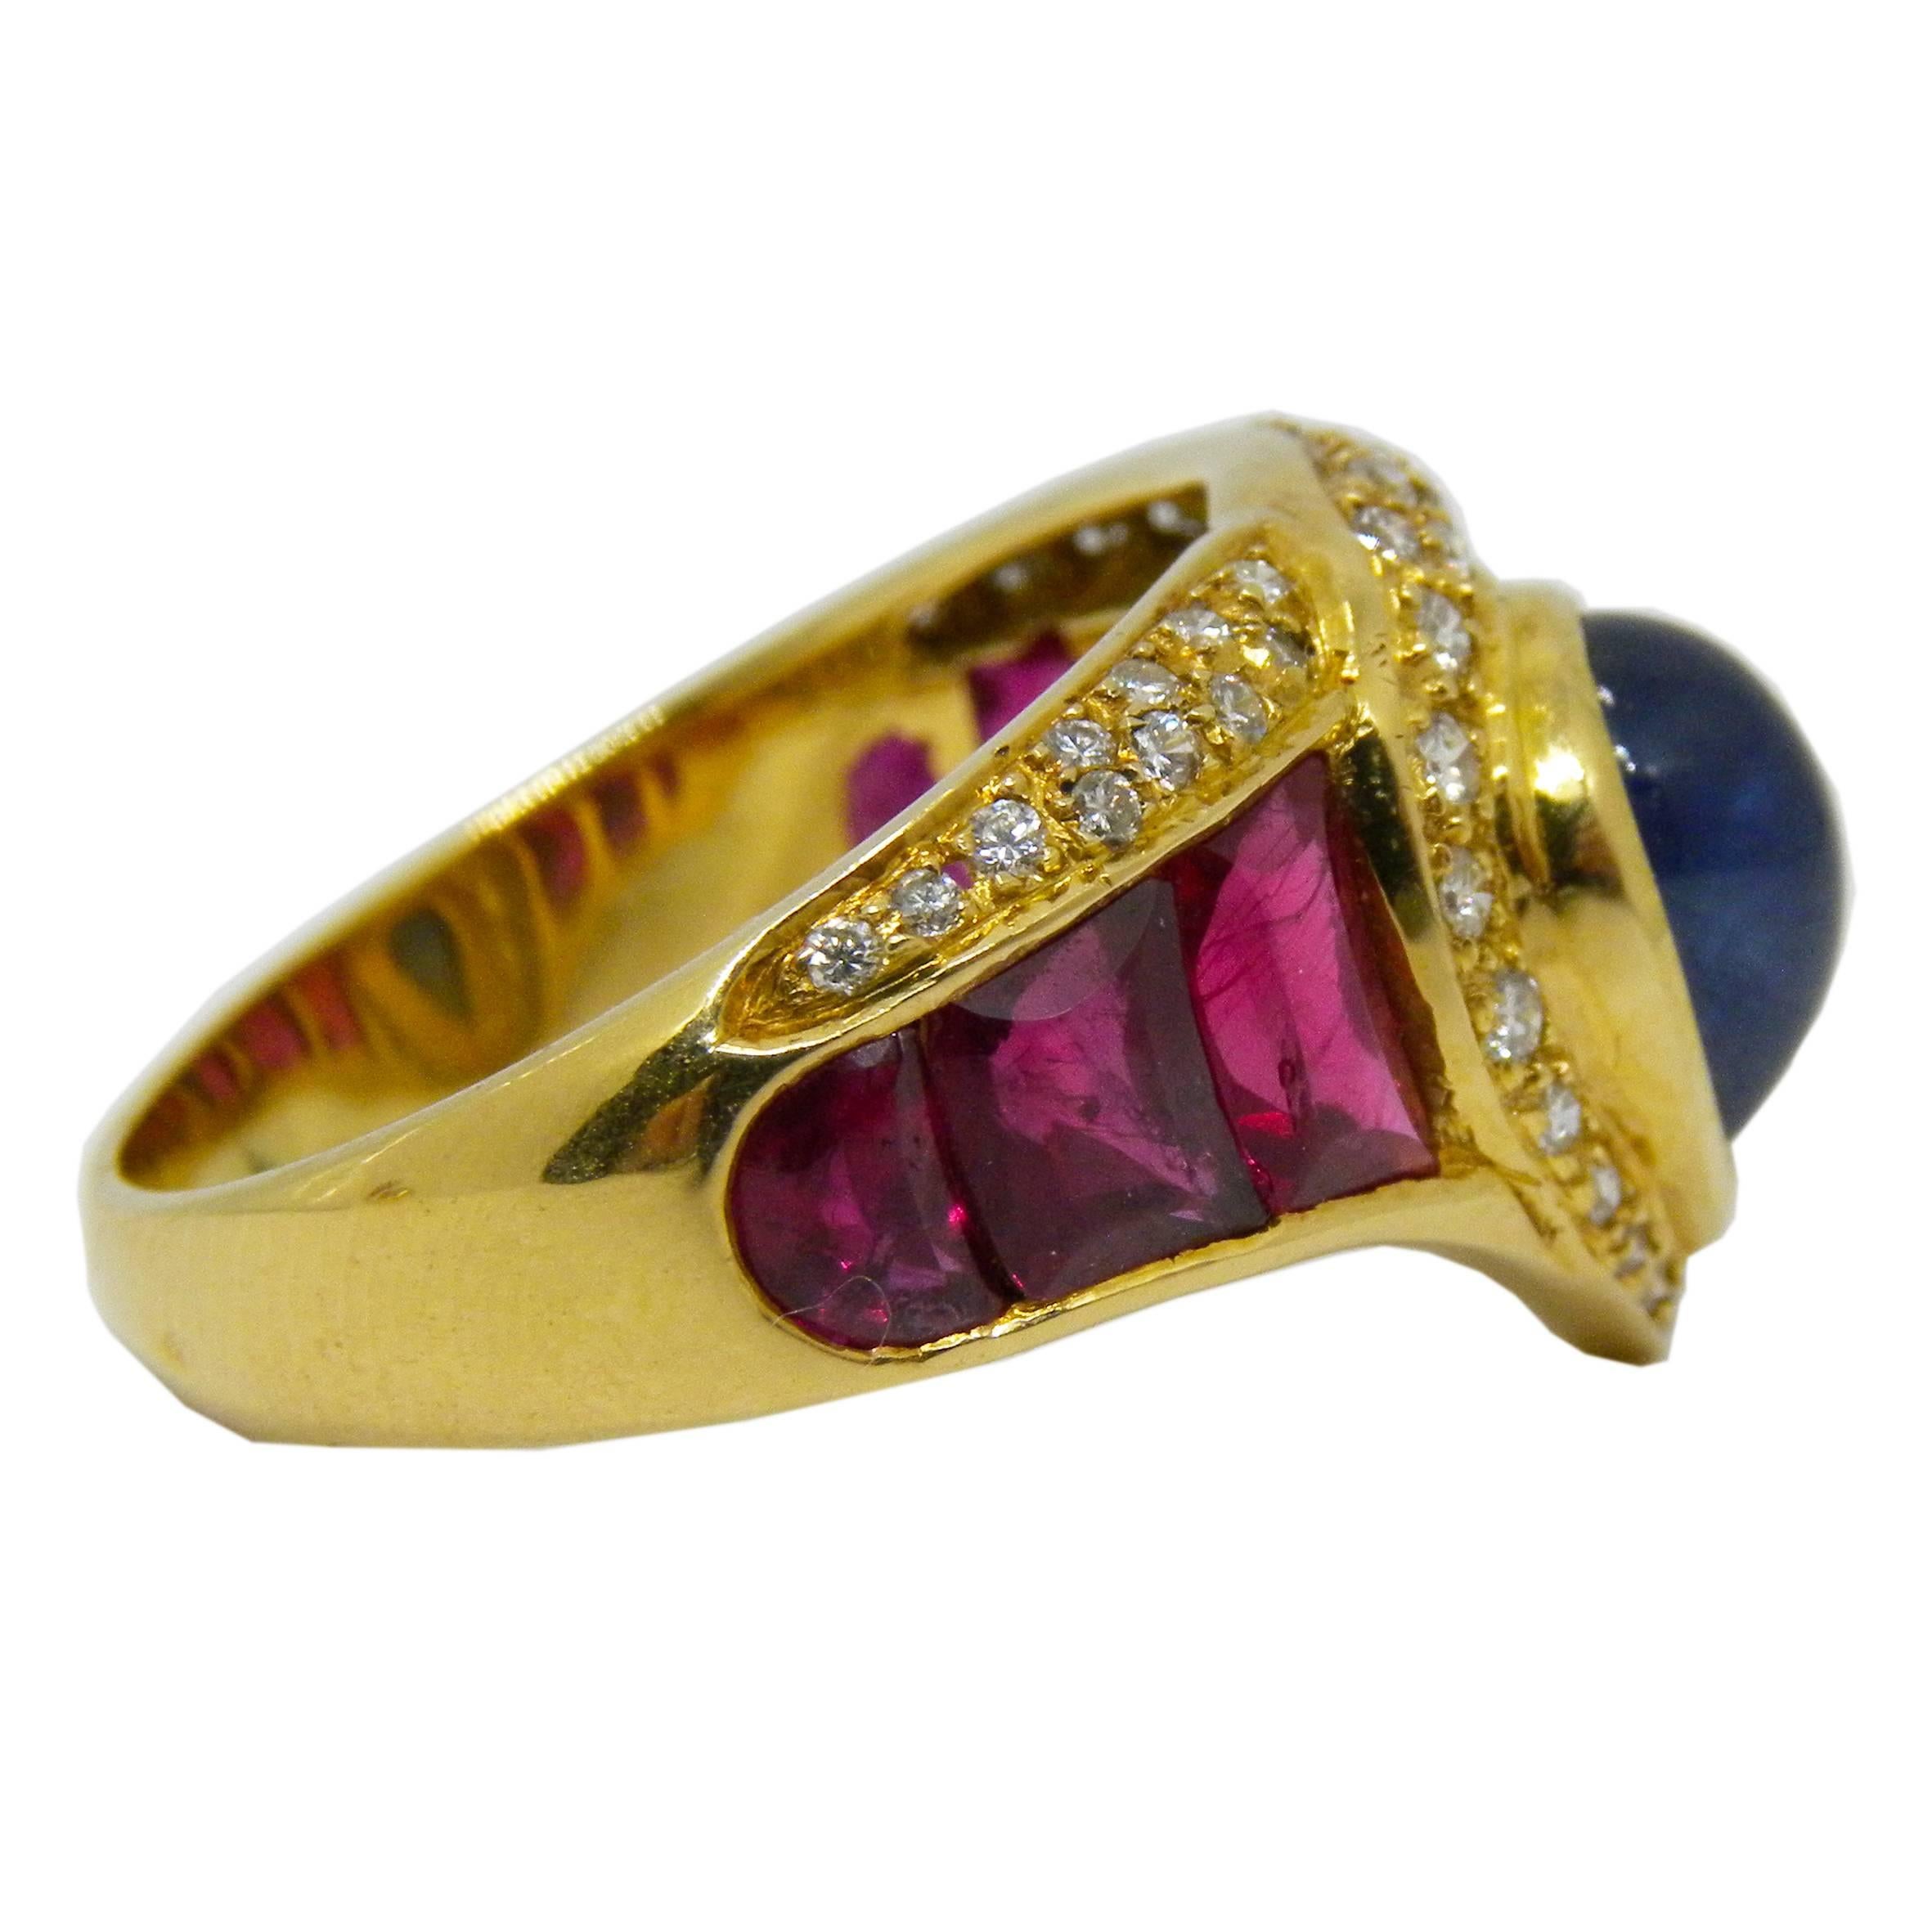 Unique original 80's italian cocktail ring featuring one 1.35 Carat Natural Drop Cabochon Blue Sapphire 1.17 Carat Ruby Cabochon Baguette 42 White Diamond  for a total amount of 0.65 Carat,18 Carat yellow gold setting.
Us Size 5.50
French Size